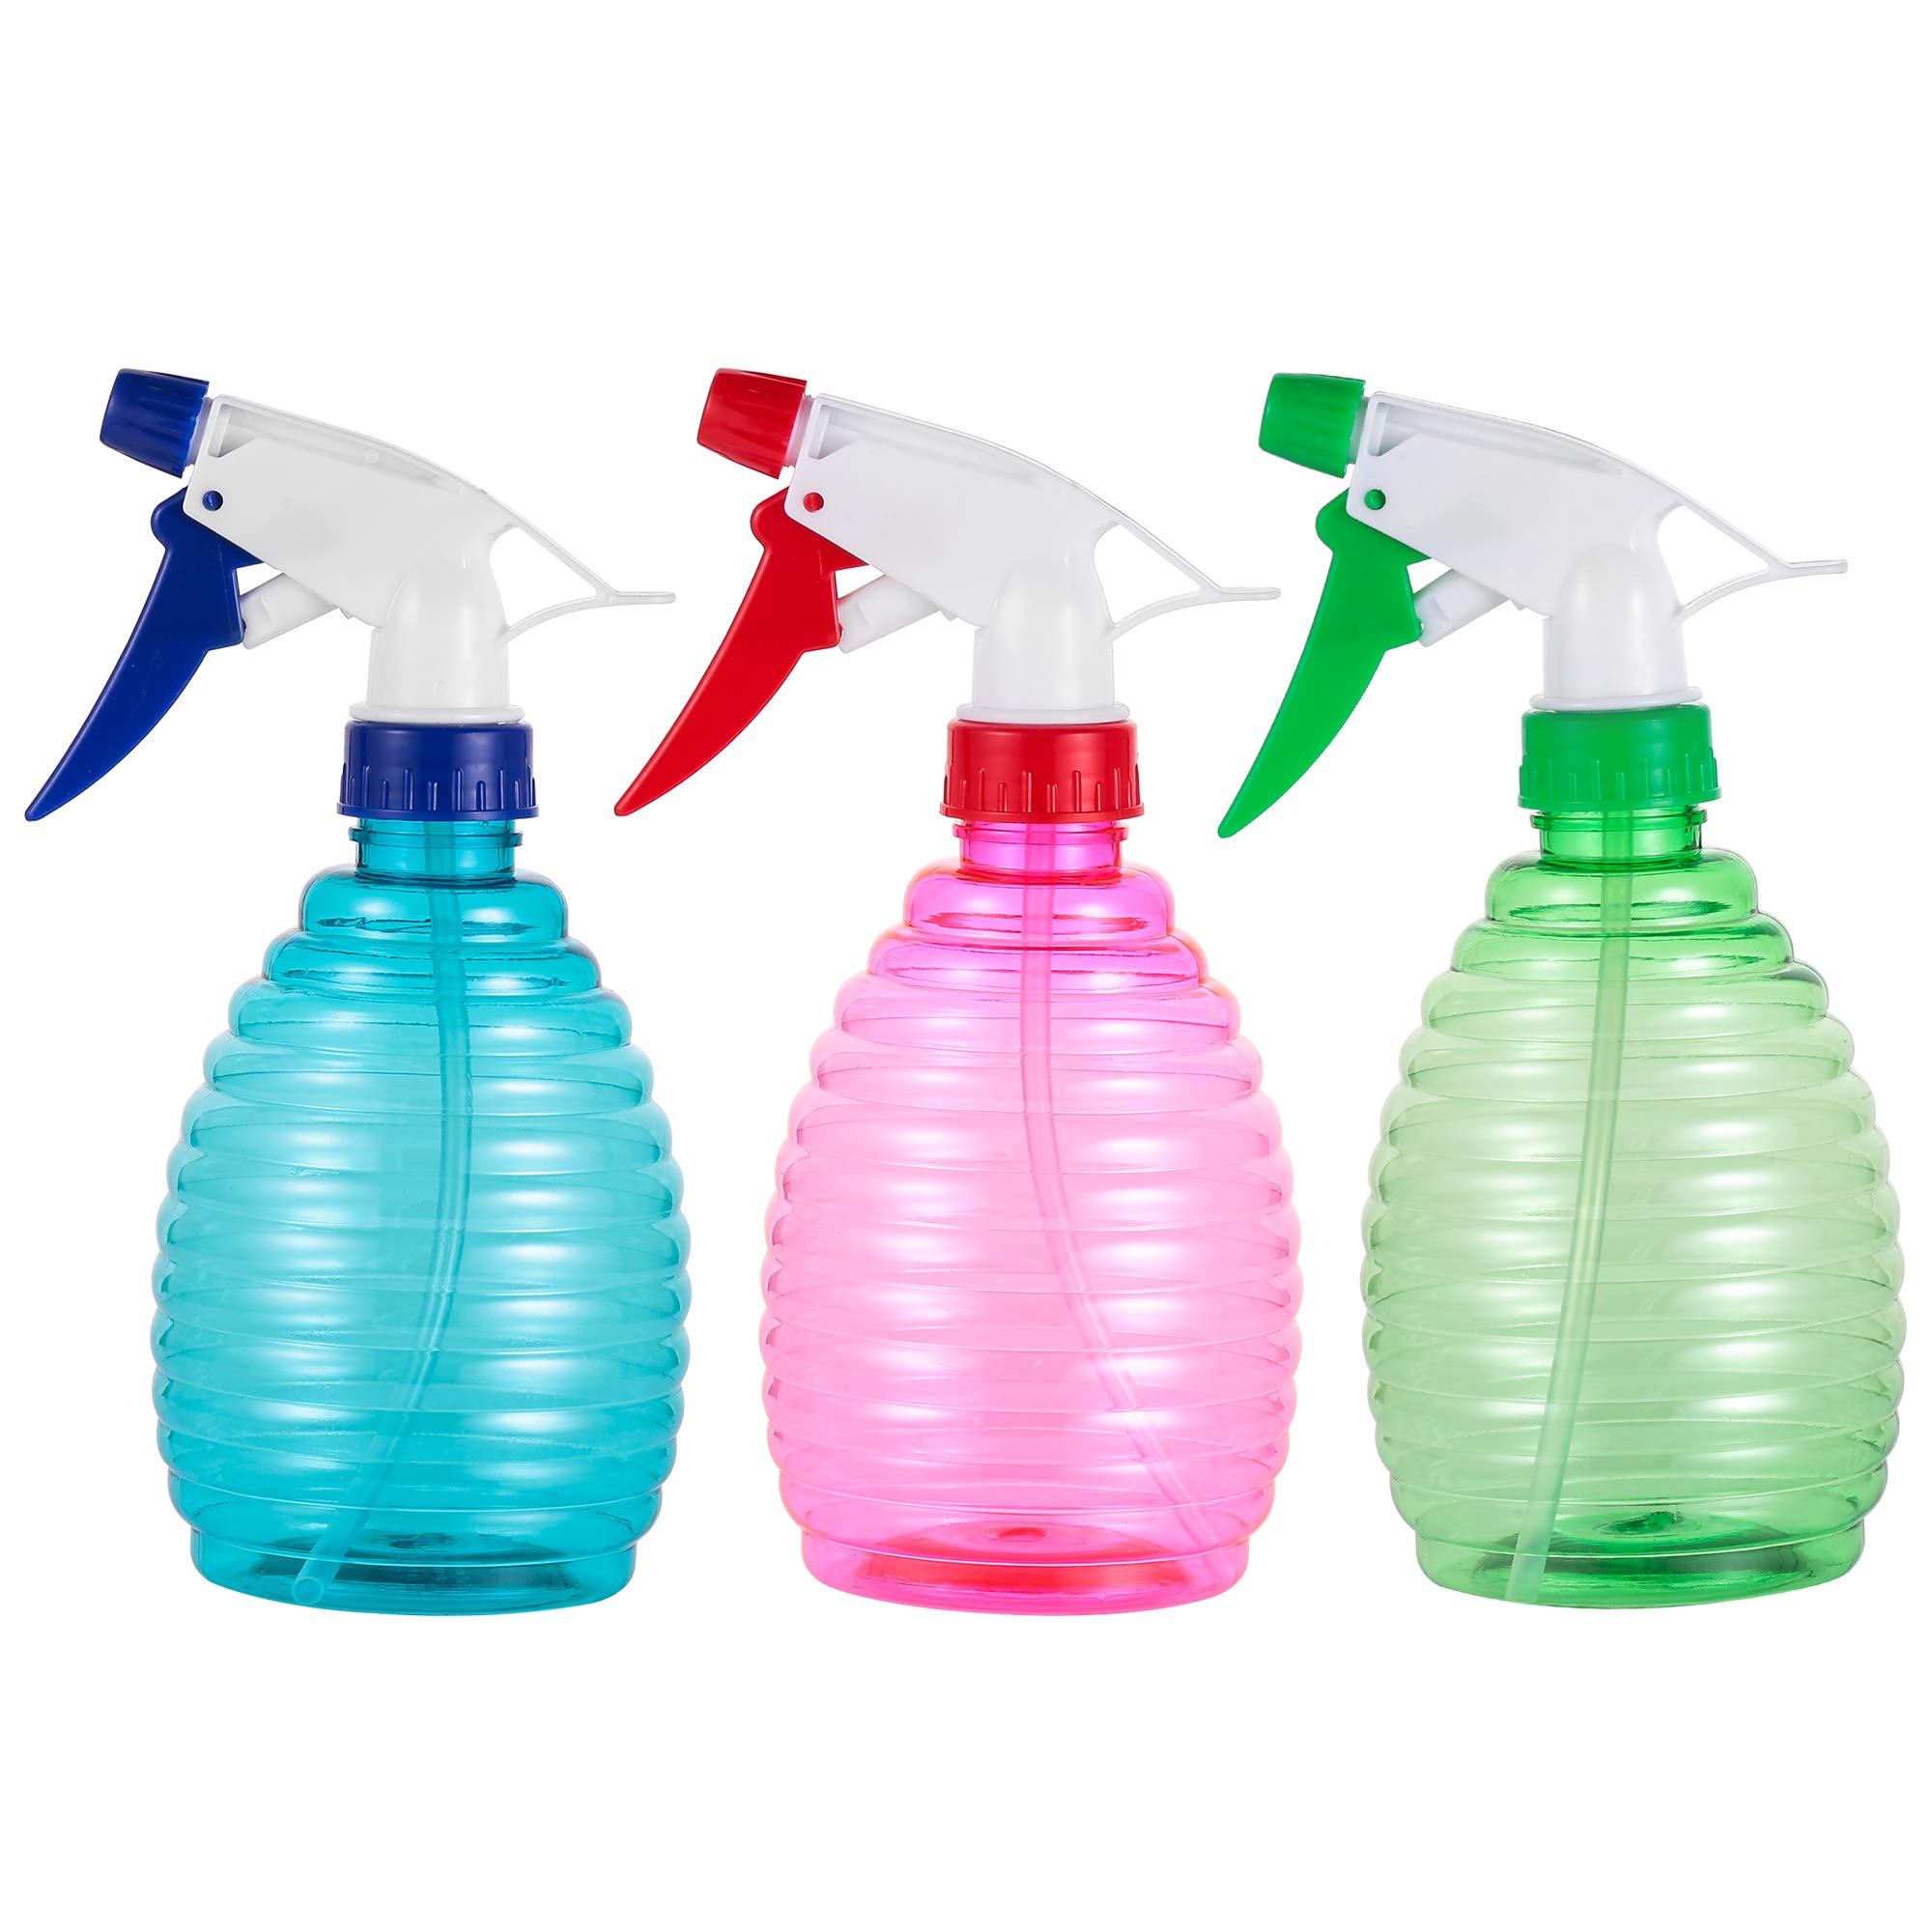 Pack of 3-16 Oz Empty Plastic Spray Bottles - Attractive Vibrant Colors -  Multi Purpose Use Durable